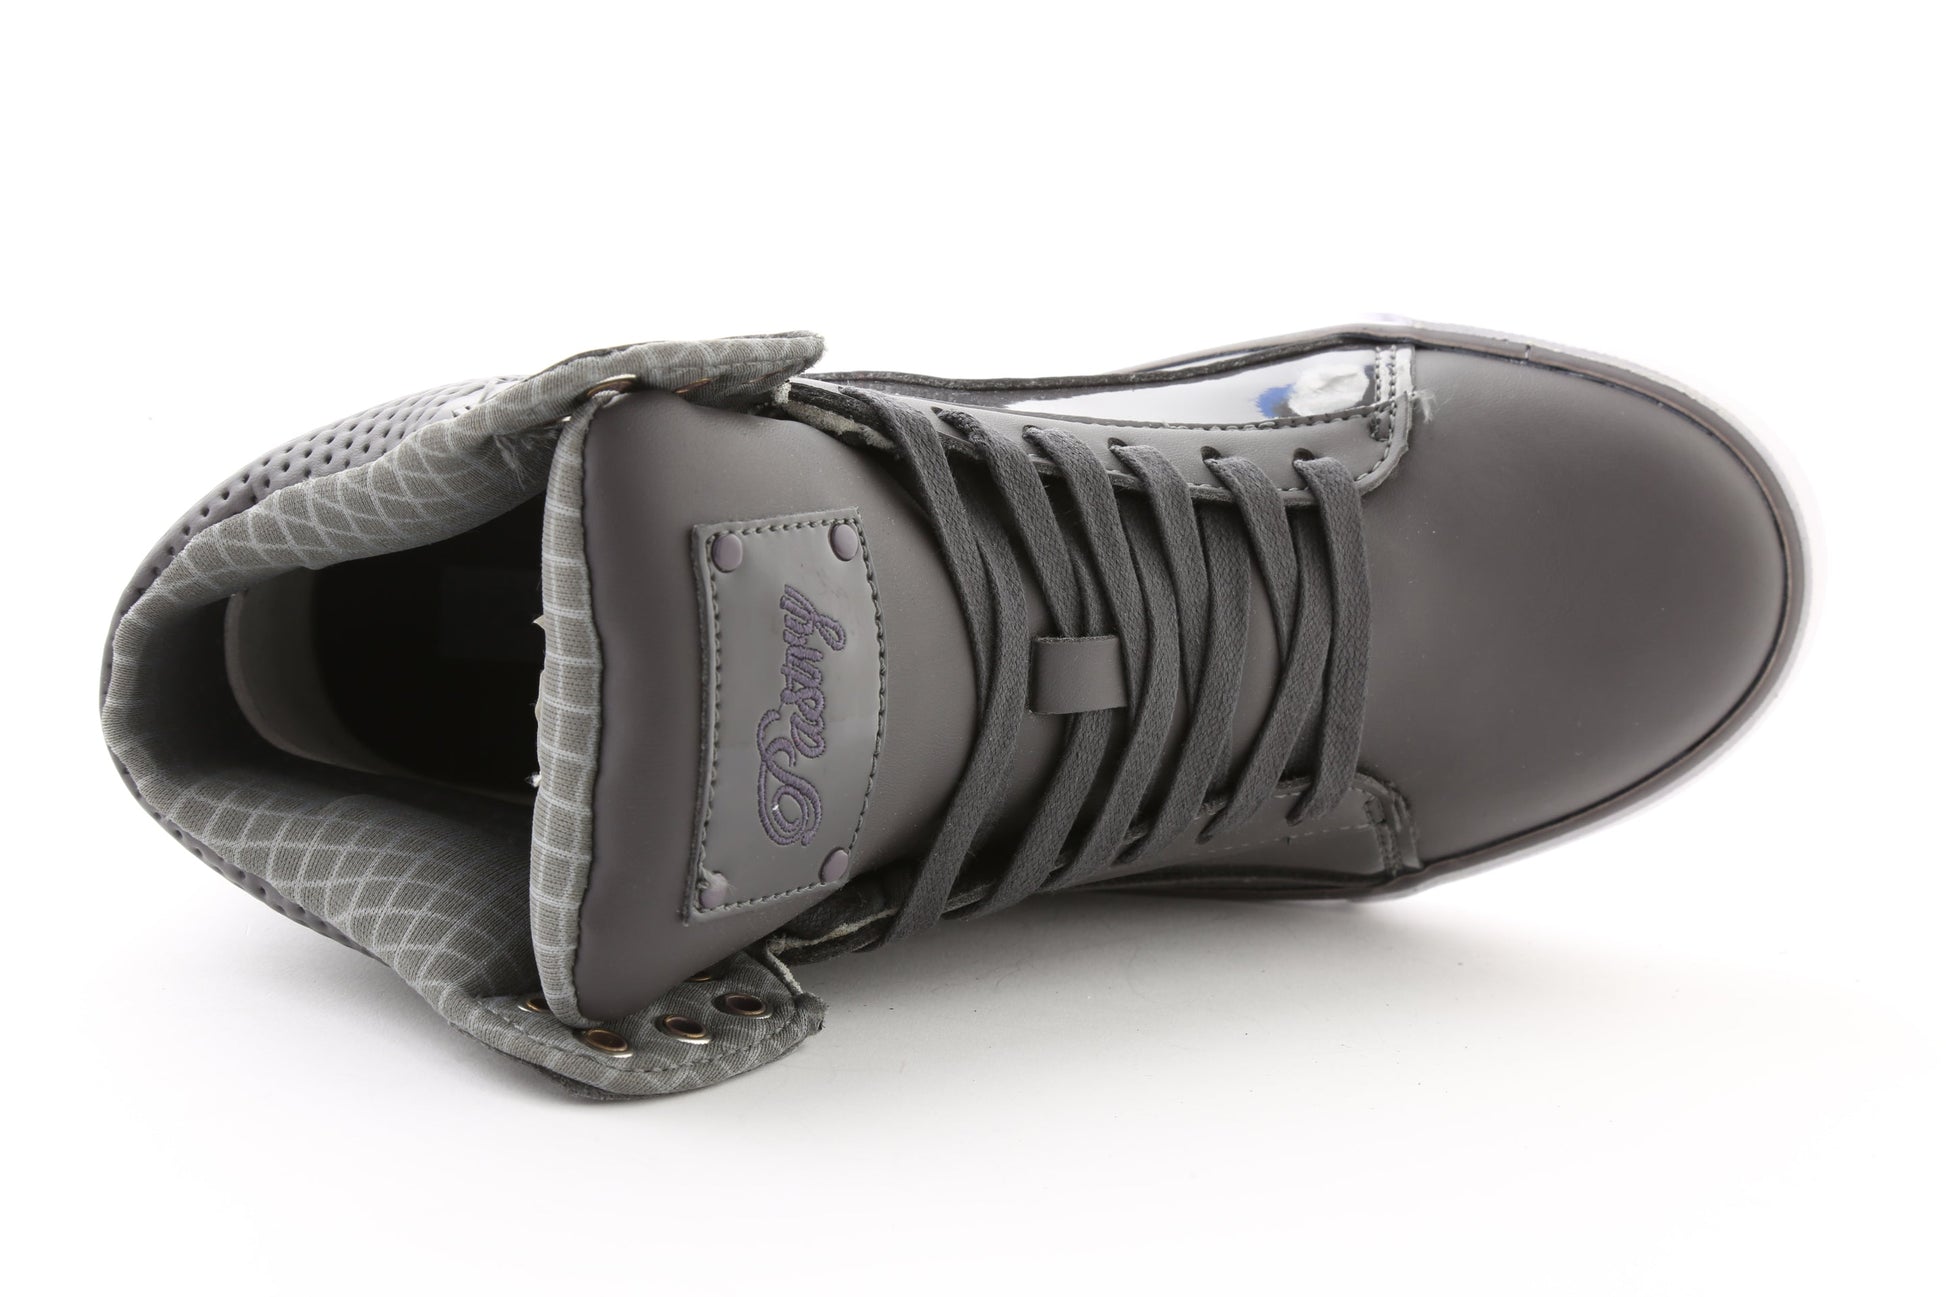 Pastry Pop Tart Grid Youth Sneaker in Charcoal top view